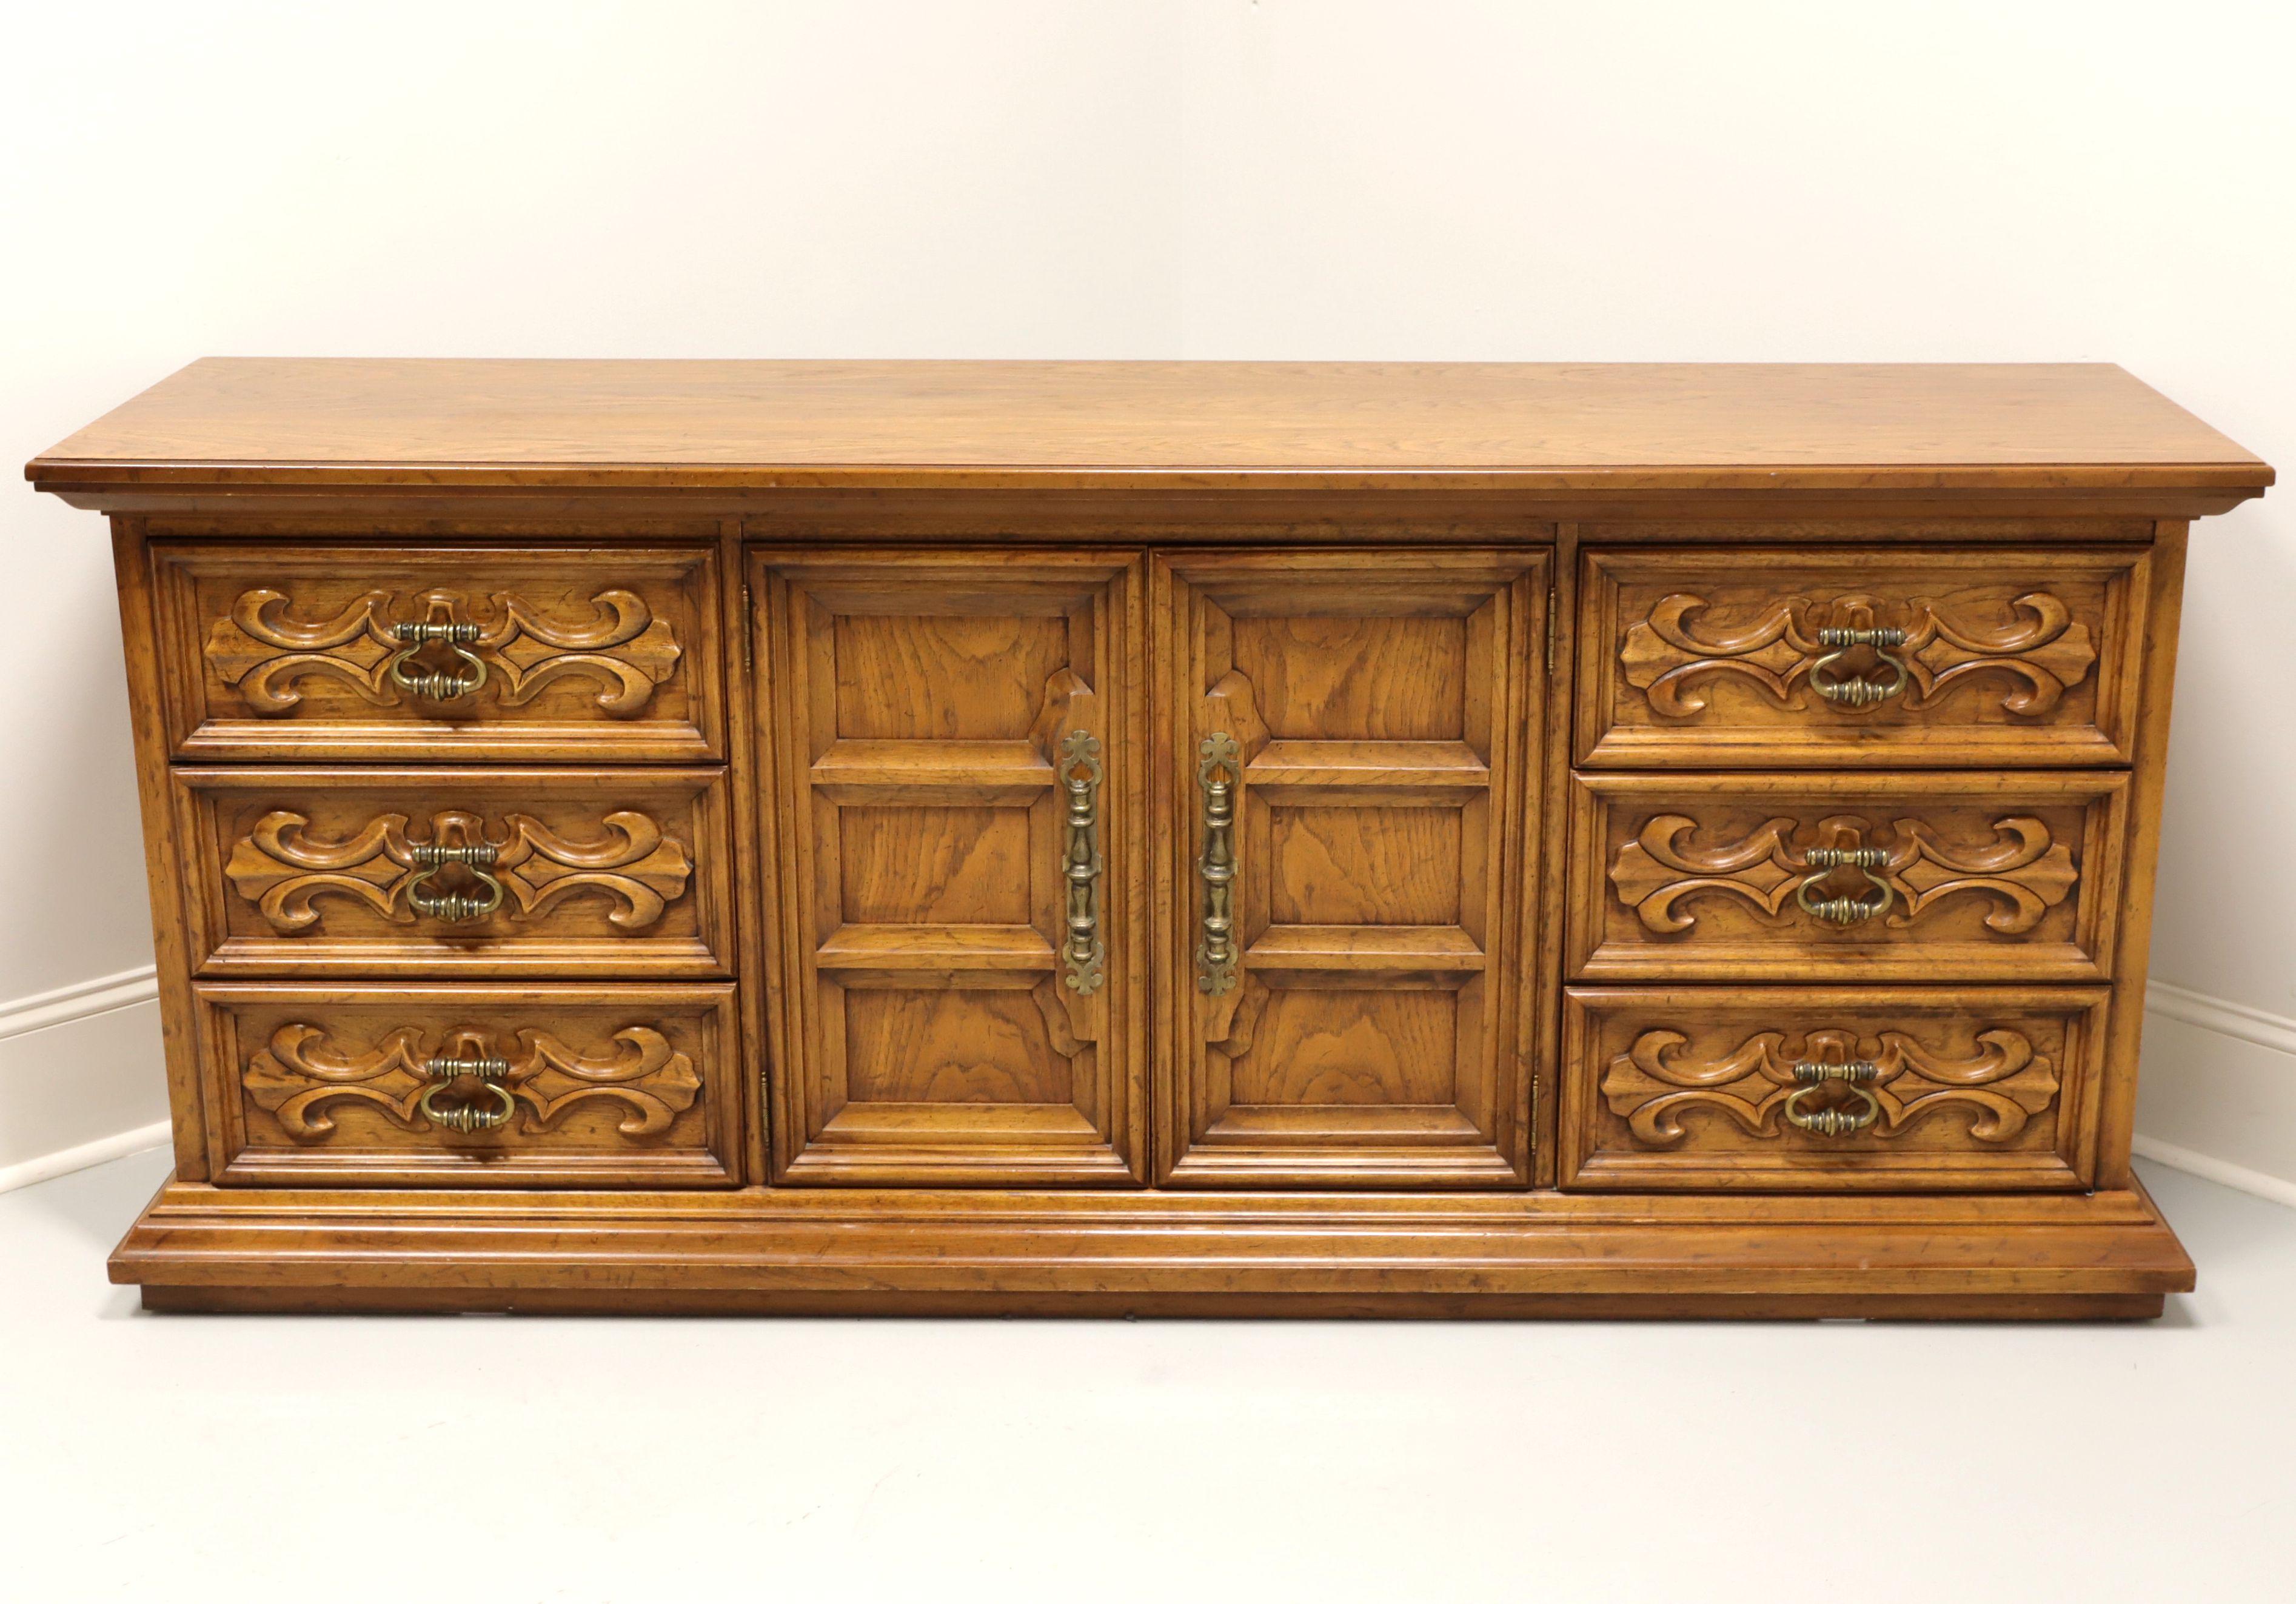 A Spanish style triple dresser by Drexel, from their Velero Collection. Pecan with a distressed finish, brass hardware, carved door and drawer fronts. Features nine drawers of dovetail construction, with three center drawers being behind solid dual